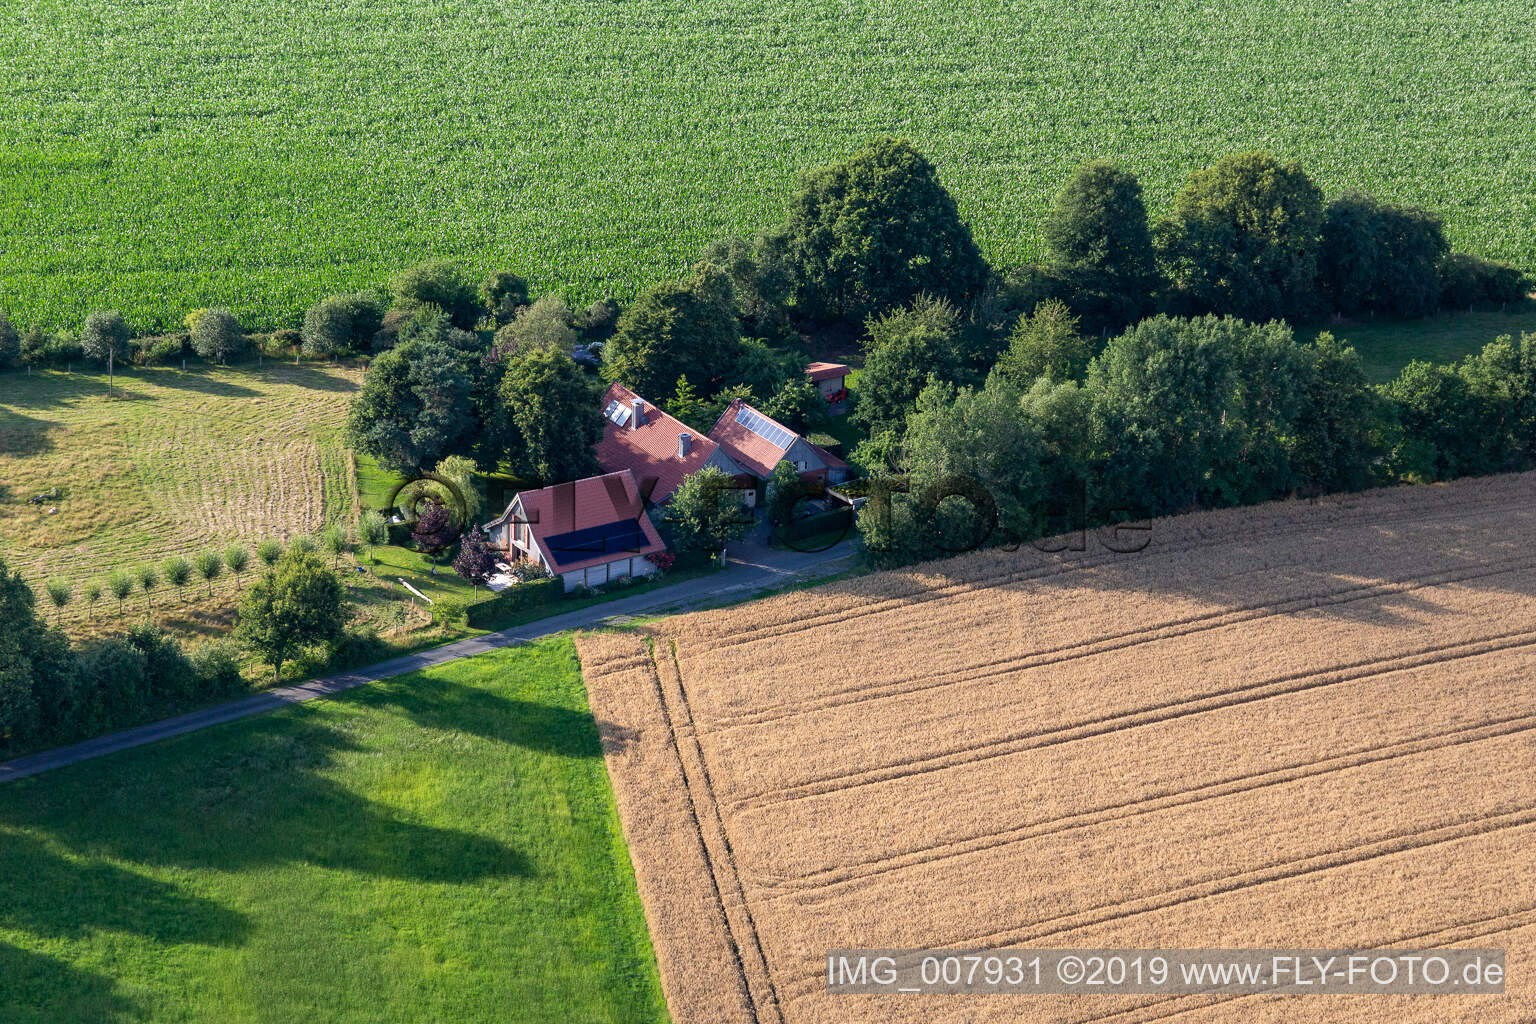 Gescher in the state North Rhine-Westphalia, Germany seen from above